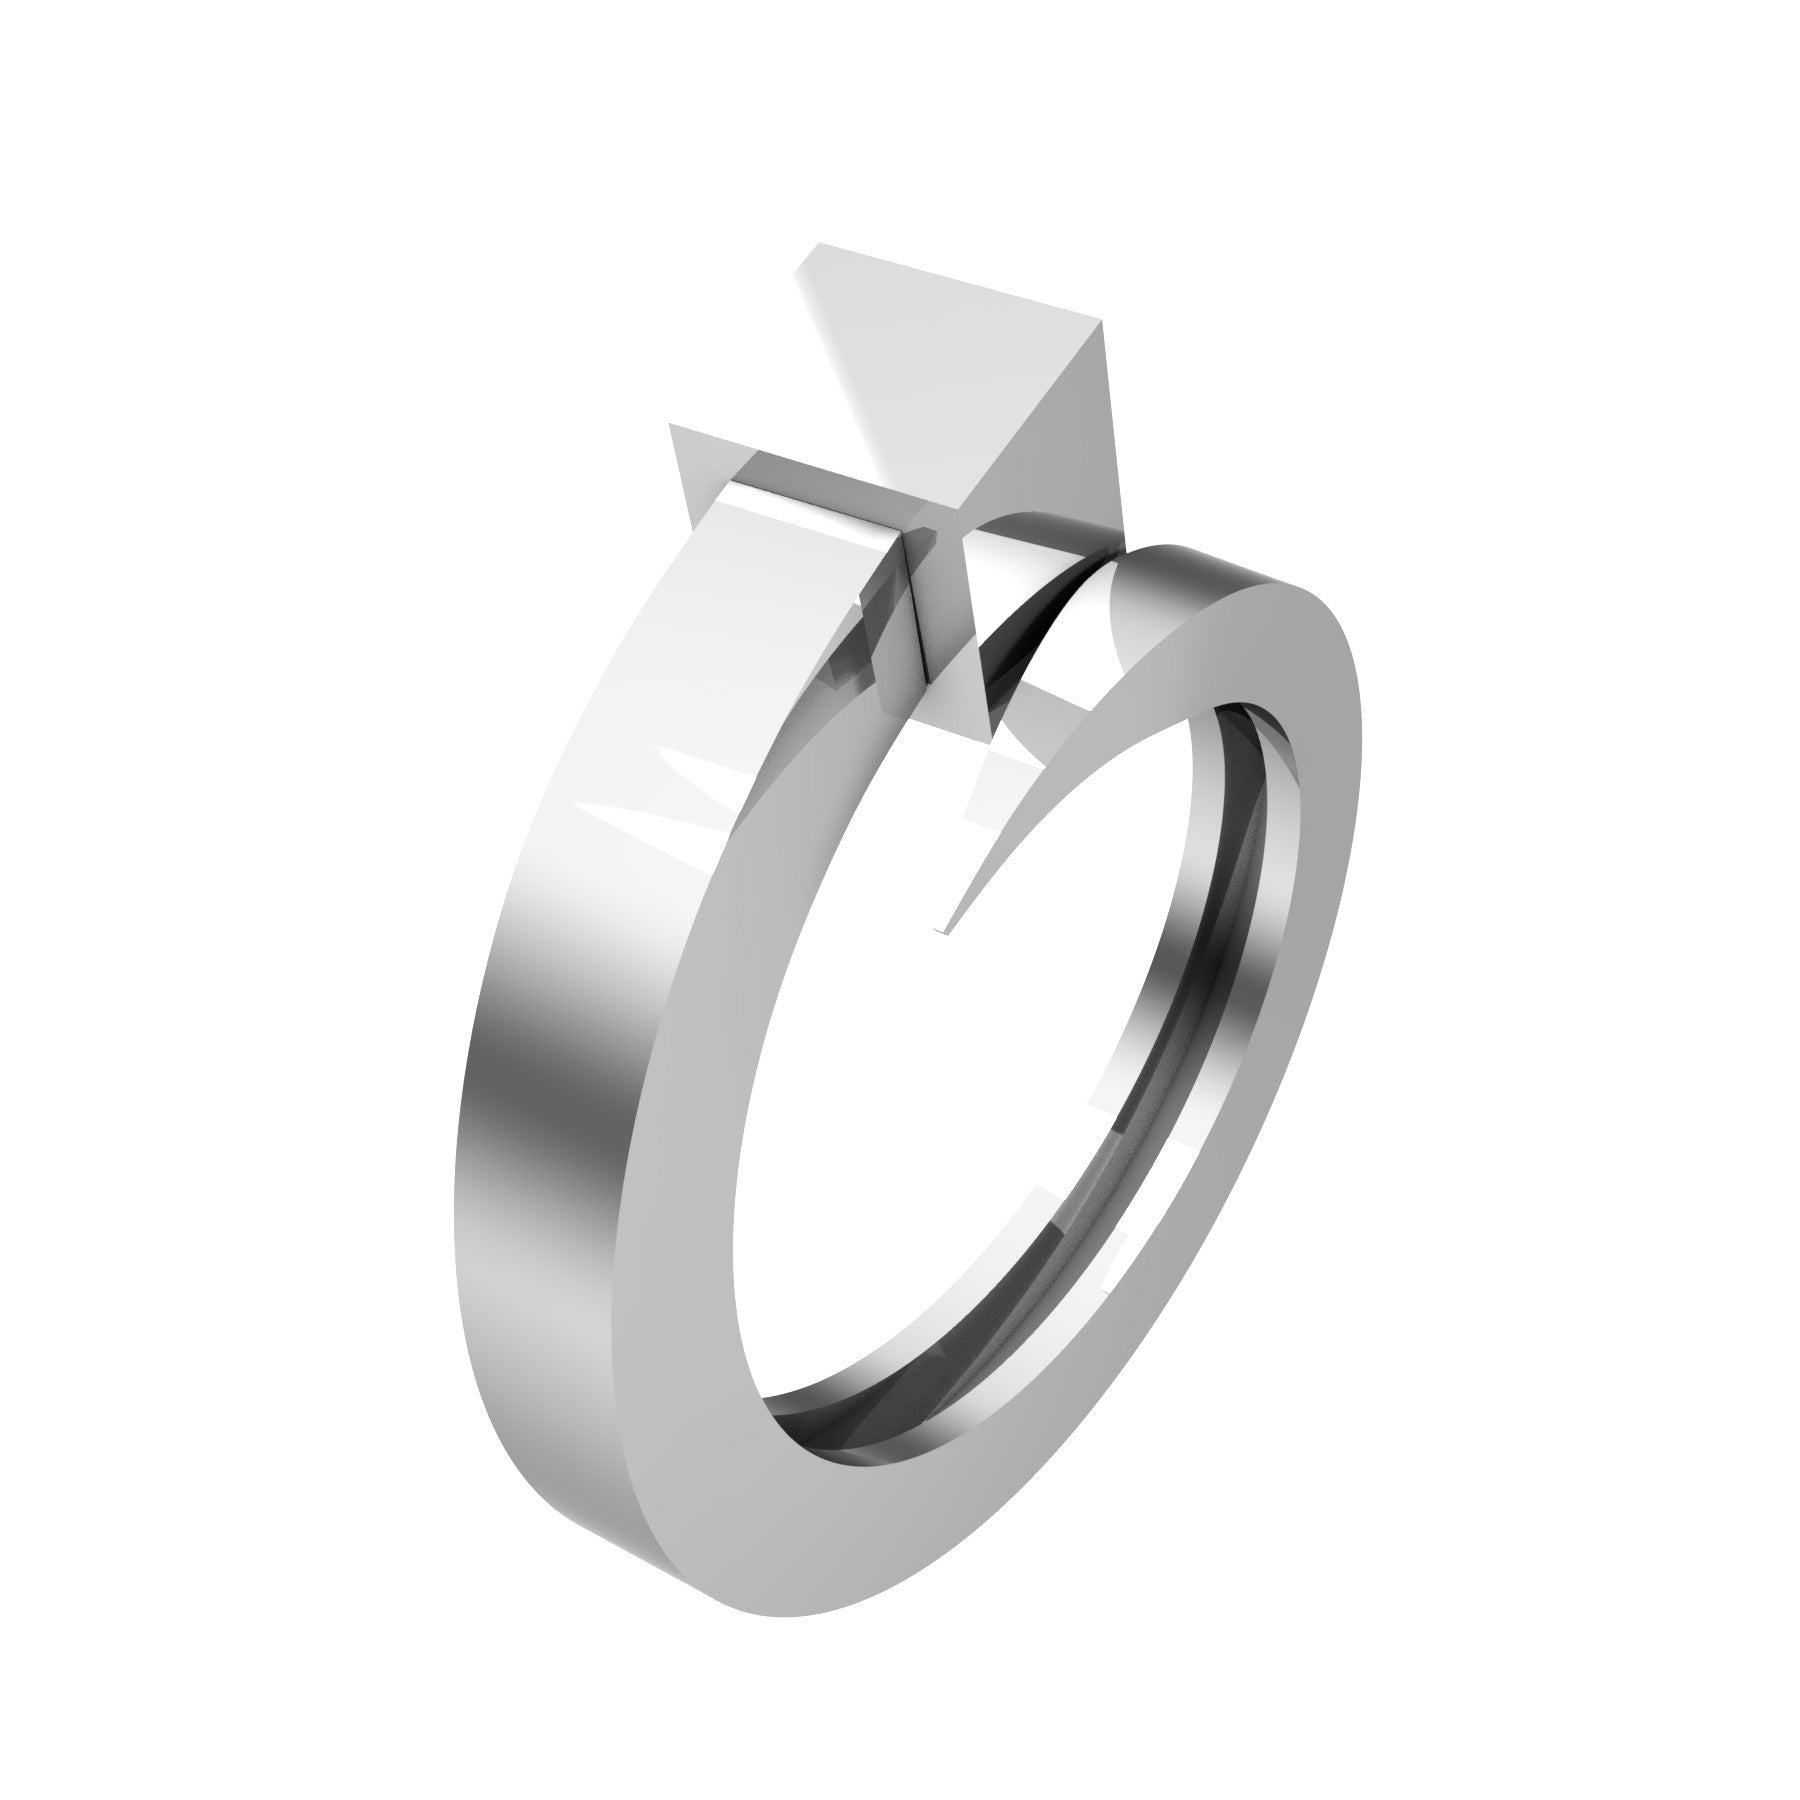 lucky Nail Ring, 18 karat white gold weight  about 8,30 g (0,29 oz); width 8,70 mm